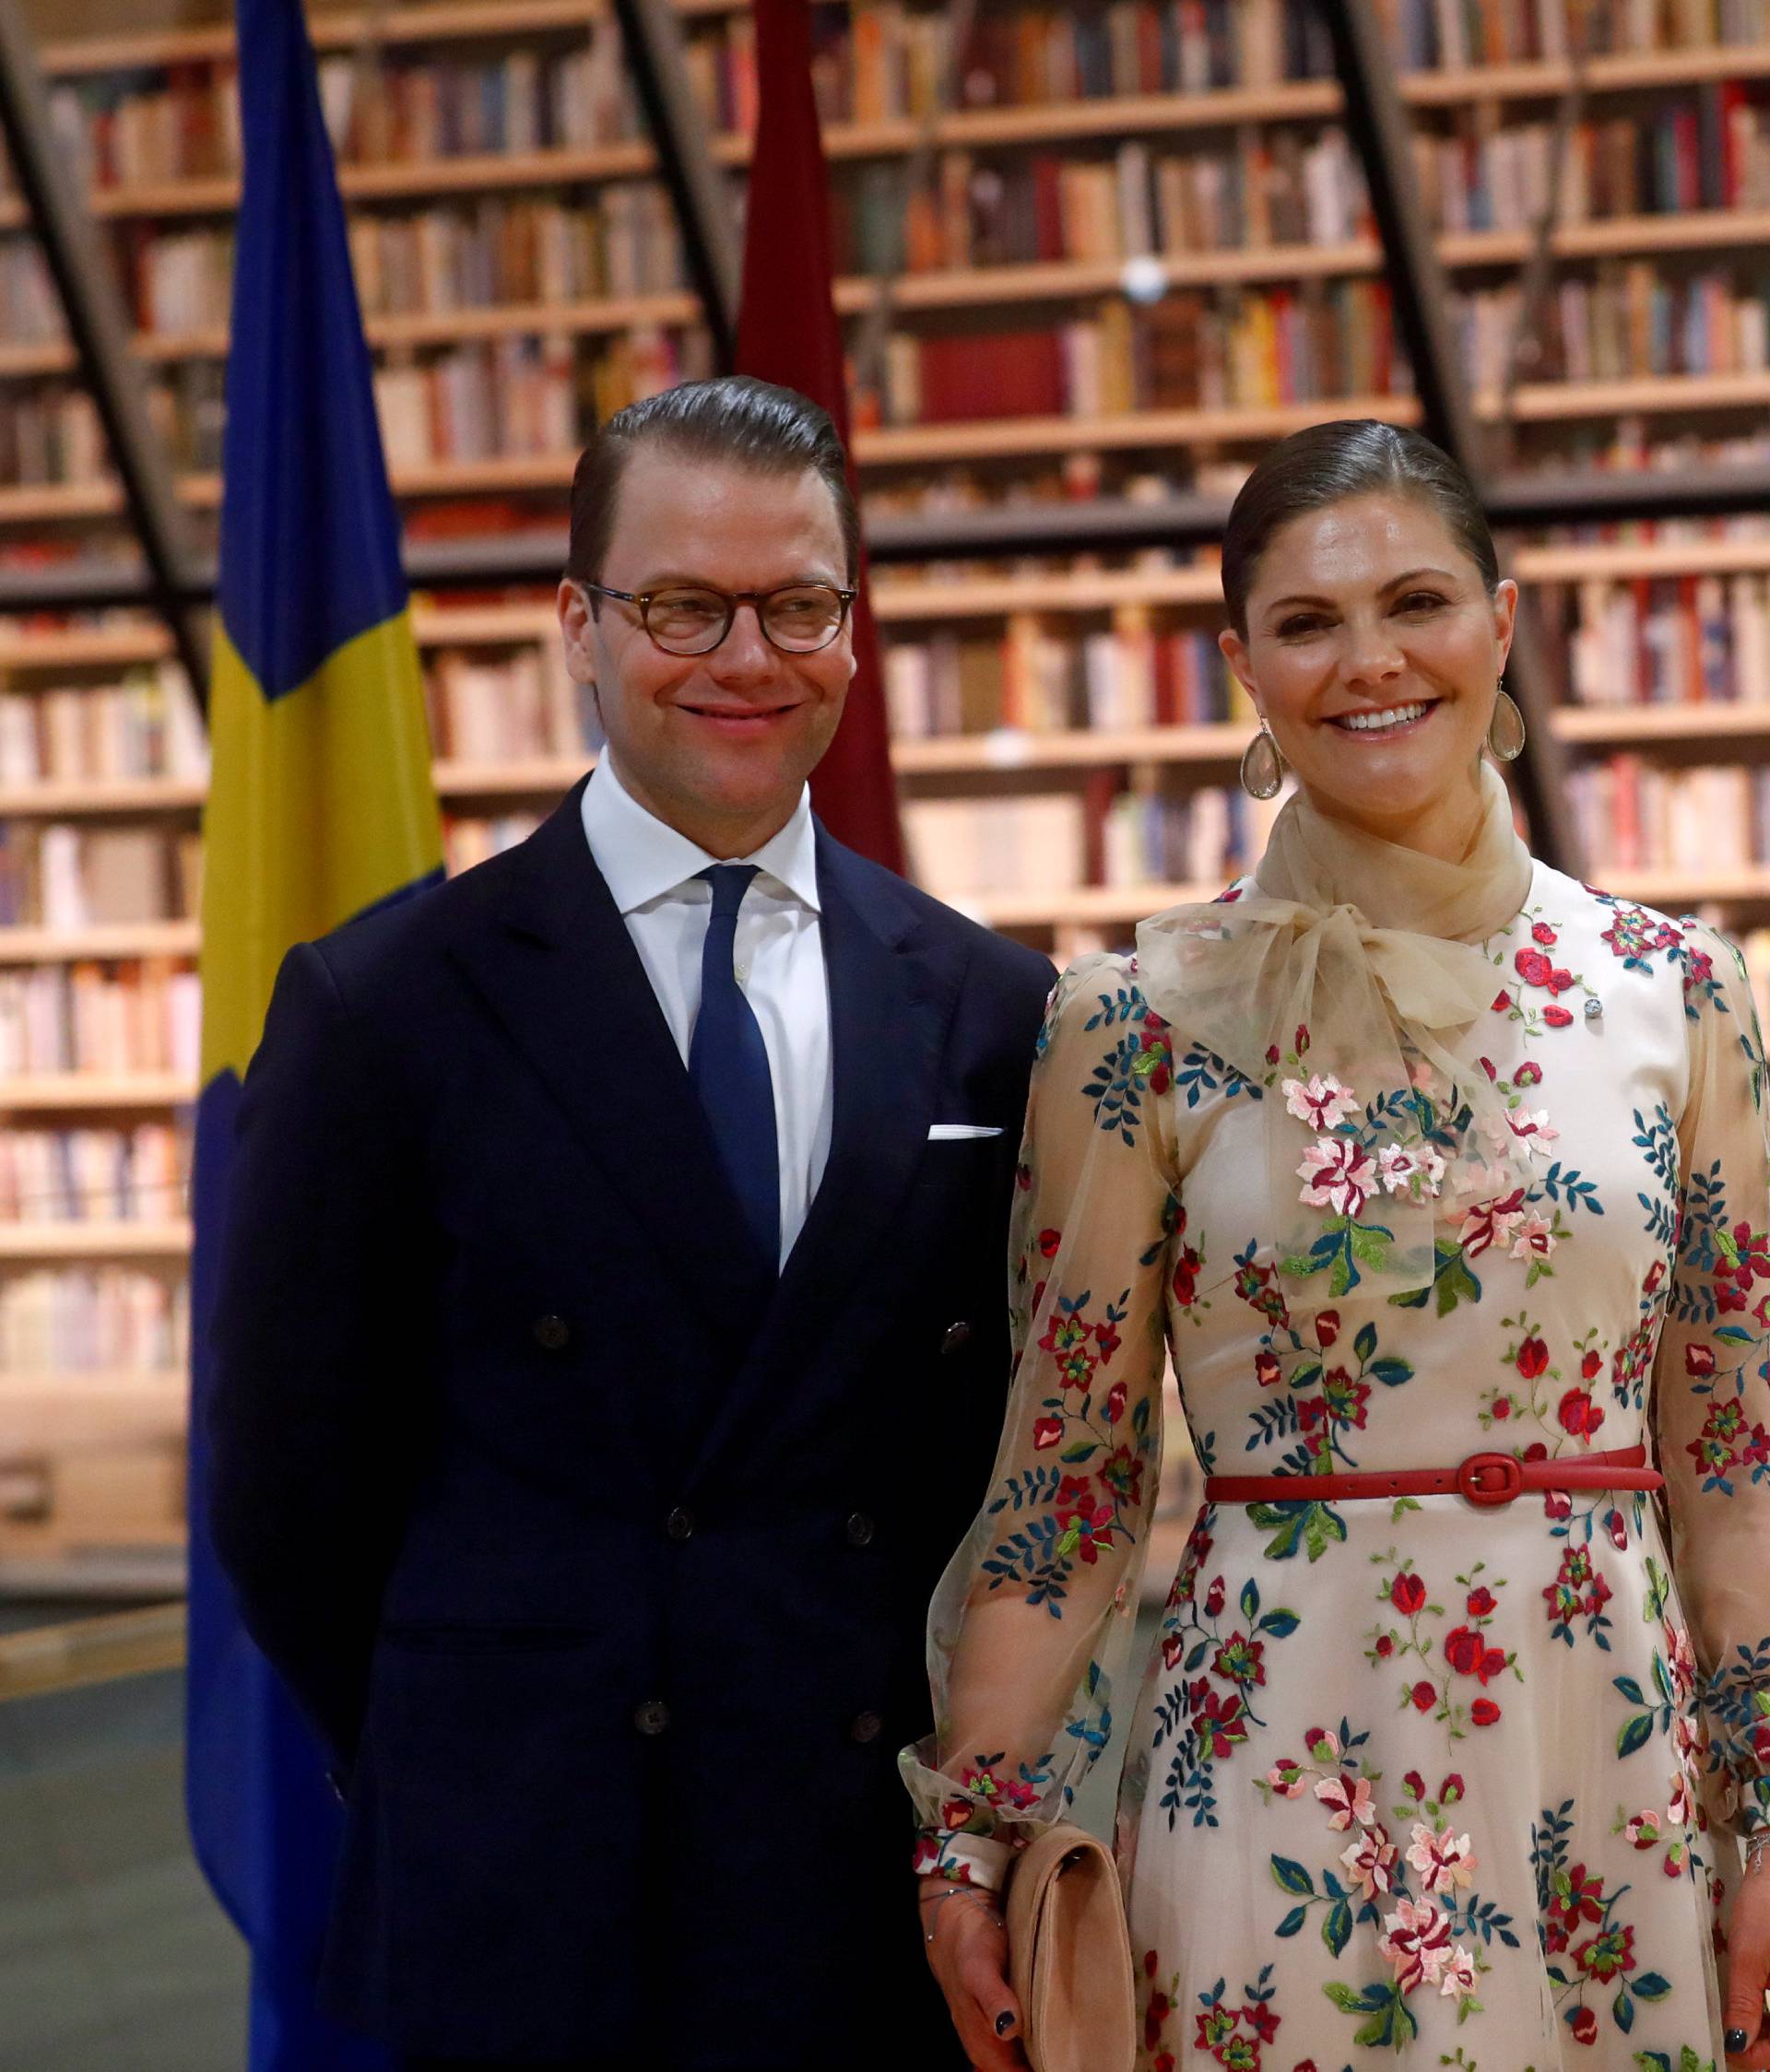 Sweden's Crown Princess Victoria and Prince Daniel attend a book presentation at the People's Bookshelf at Latvia's National Library in Riga